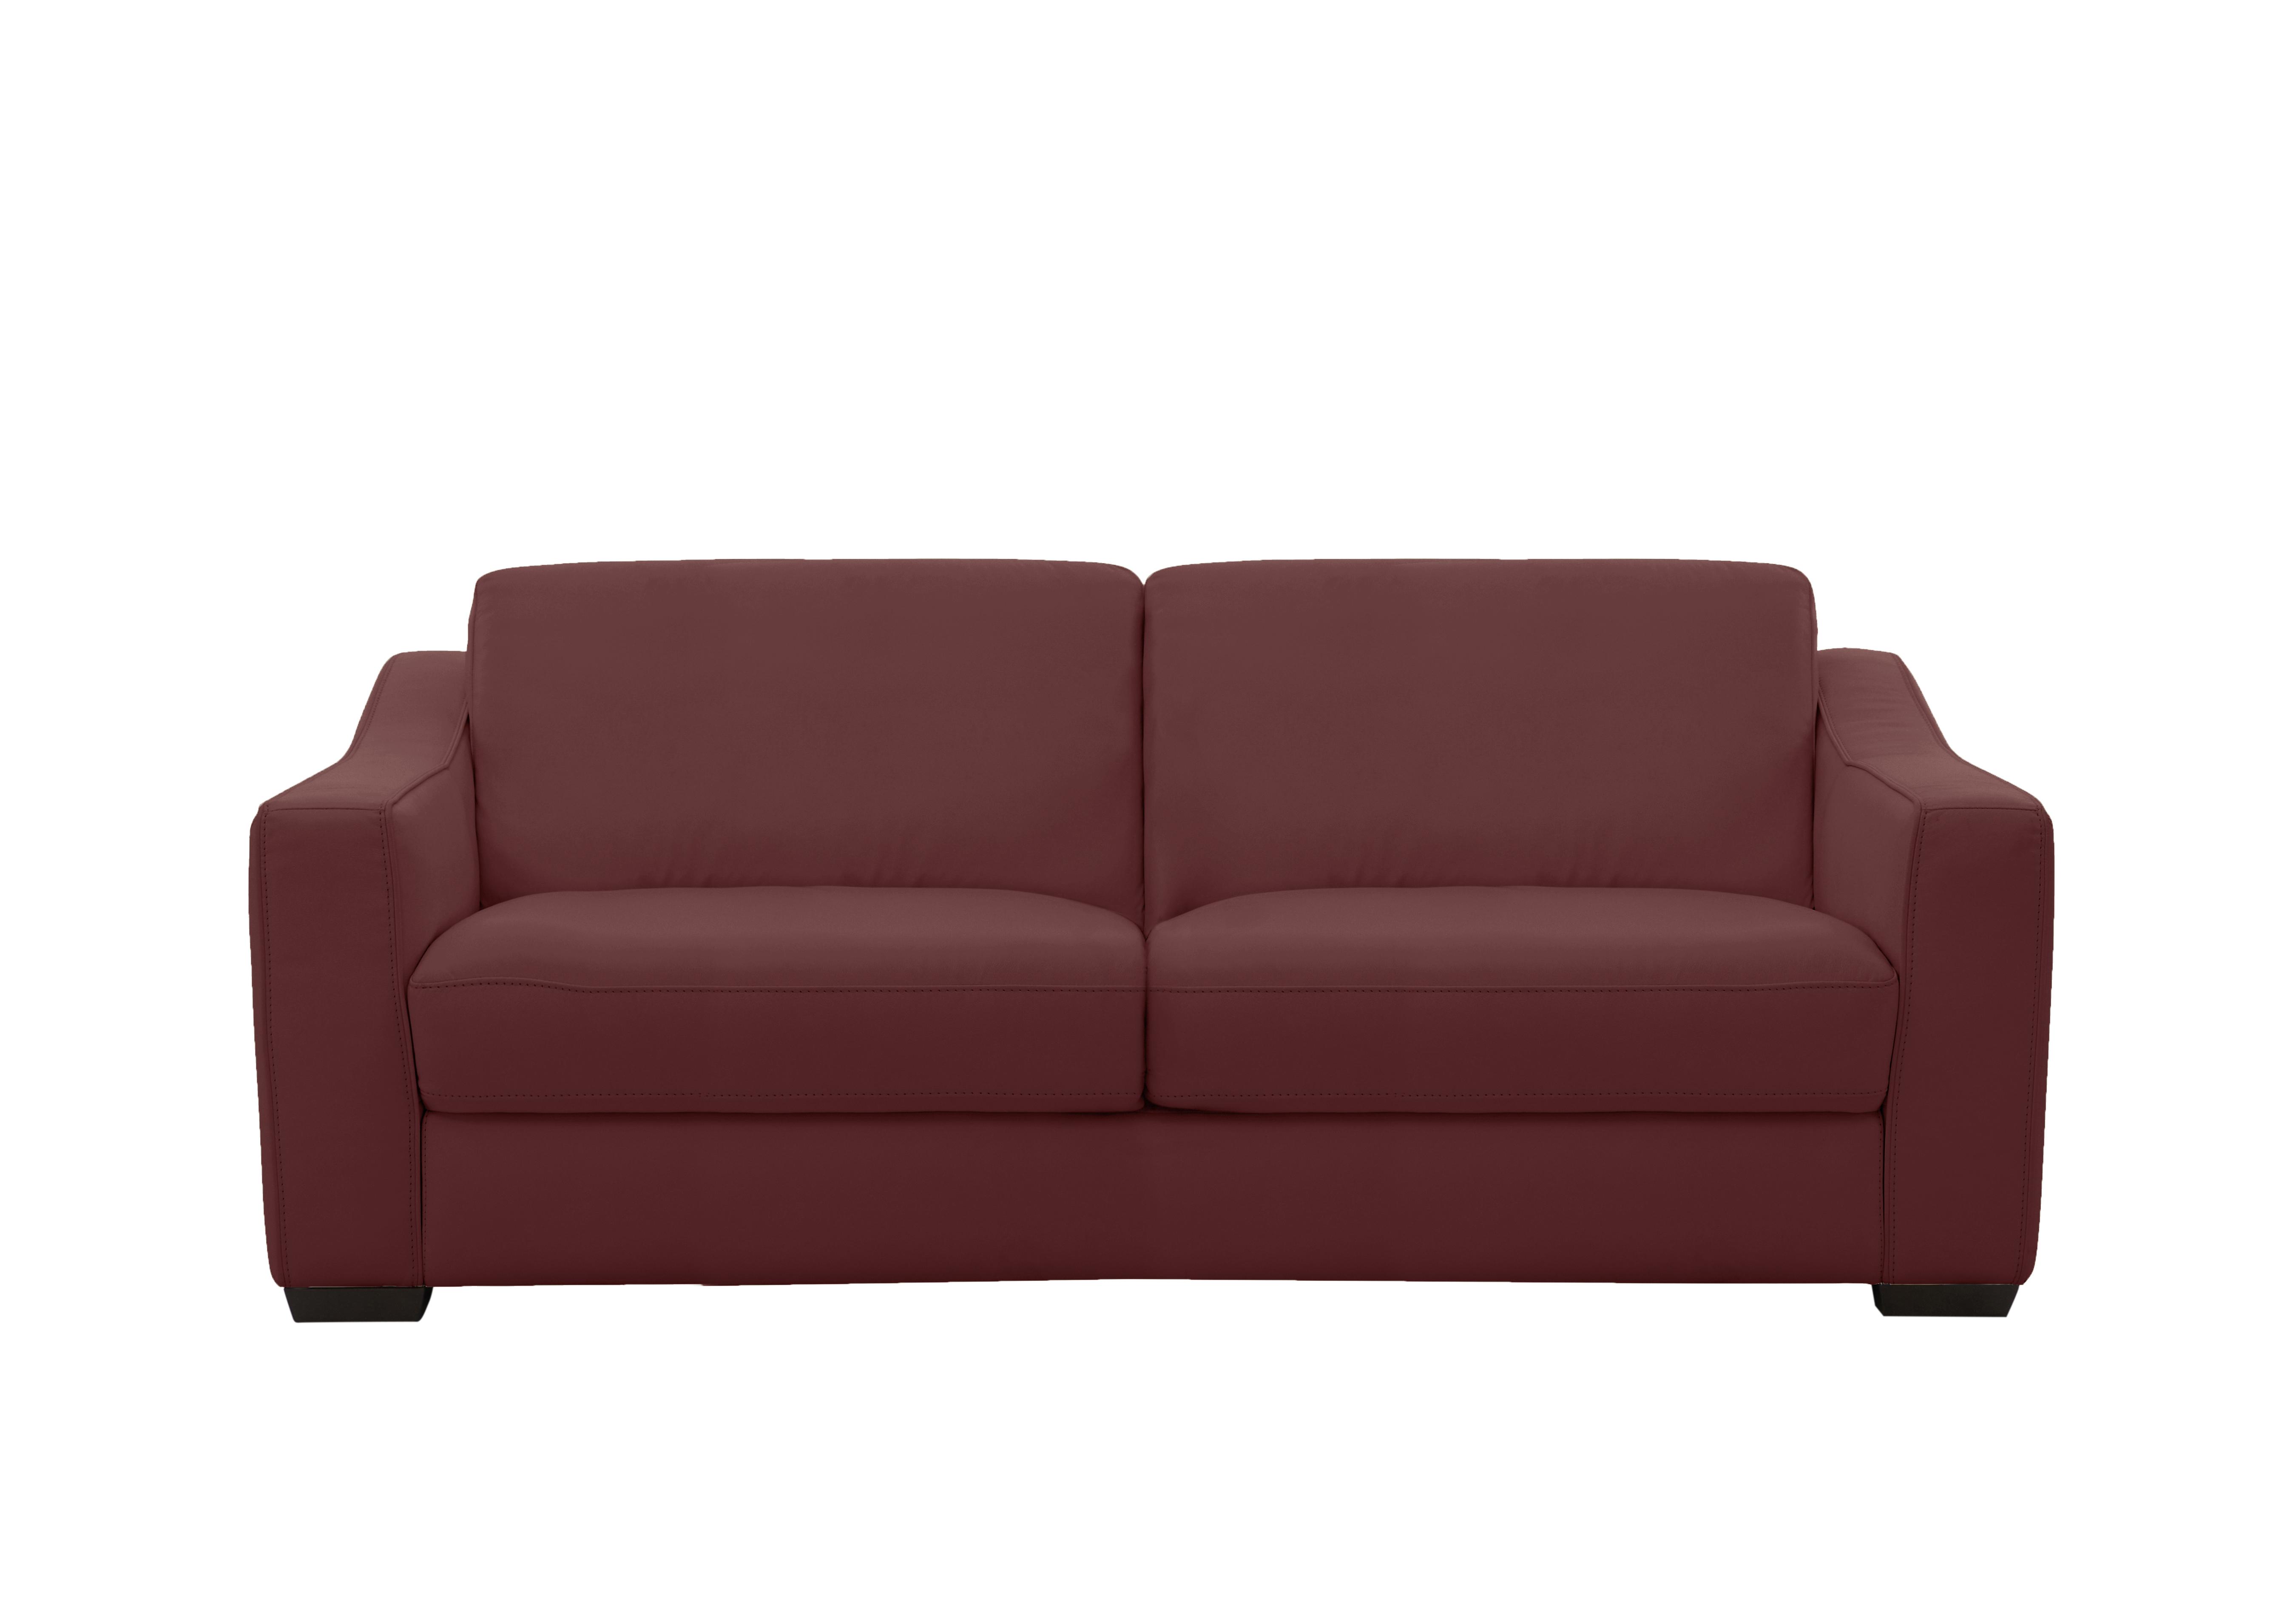 Optimus Space Saving Leather Sofa Bed with Memory Foam Mattress in Bv-035c Deep Red on Furniture Village